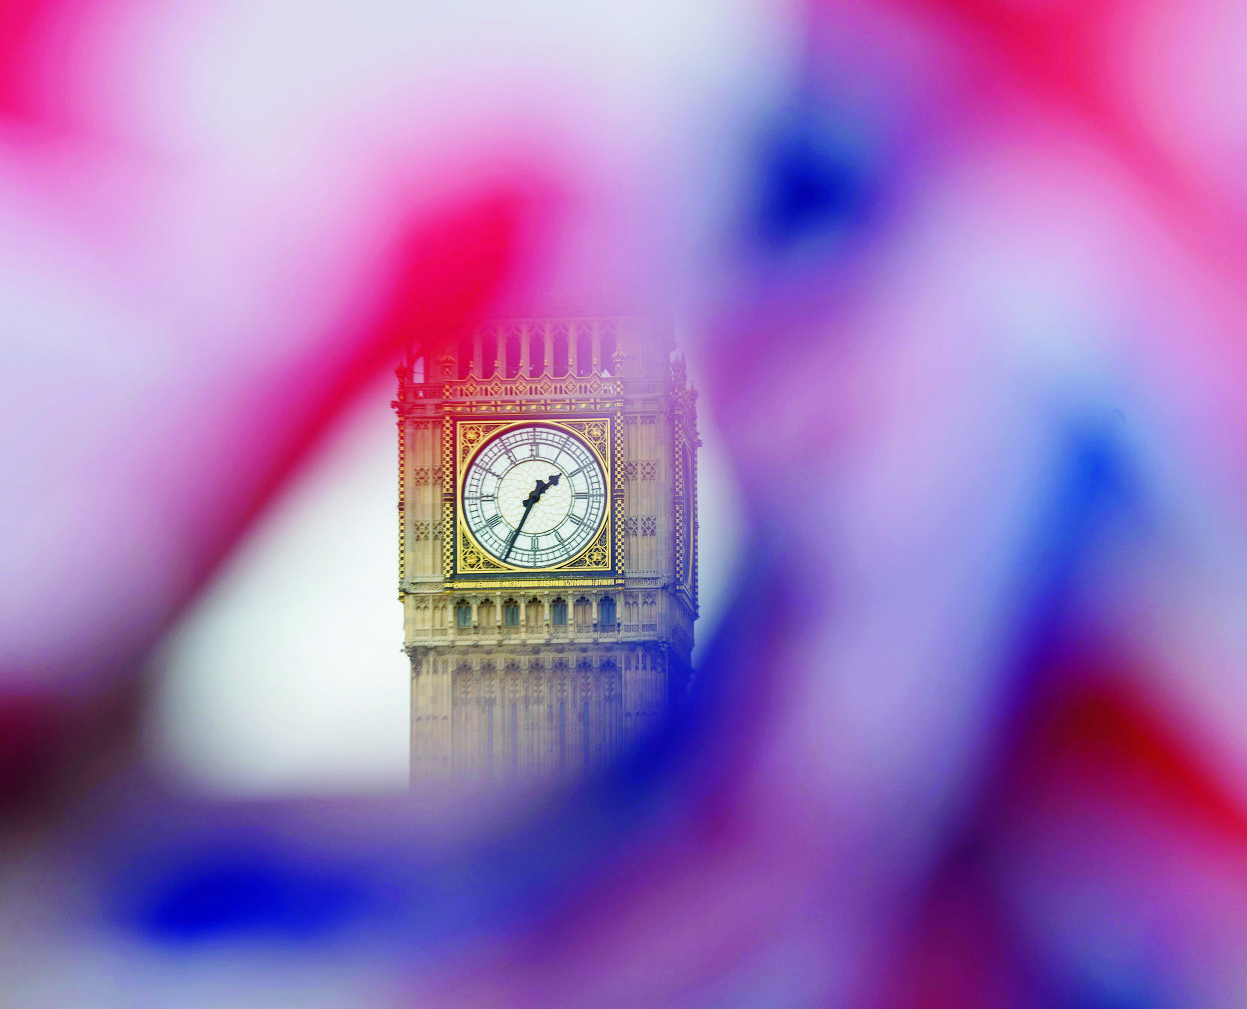 epa05383397 A British Union flag, commonly known as a Union Jack, flies in in front of the landmark Big Ben, in London, Britain, 22 June 2016.  Britons will vote on whether to remain in or leave the EU in a referendum on 23 June 2016.  EPA/HANNAH MCKAY BRITAIN BREXIT REFERENDUM CAMPAIGN